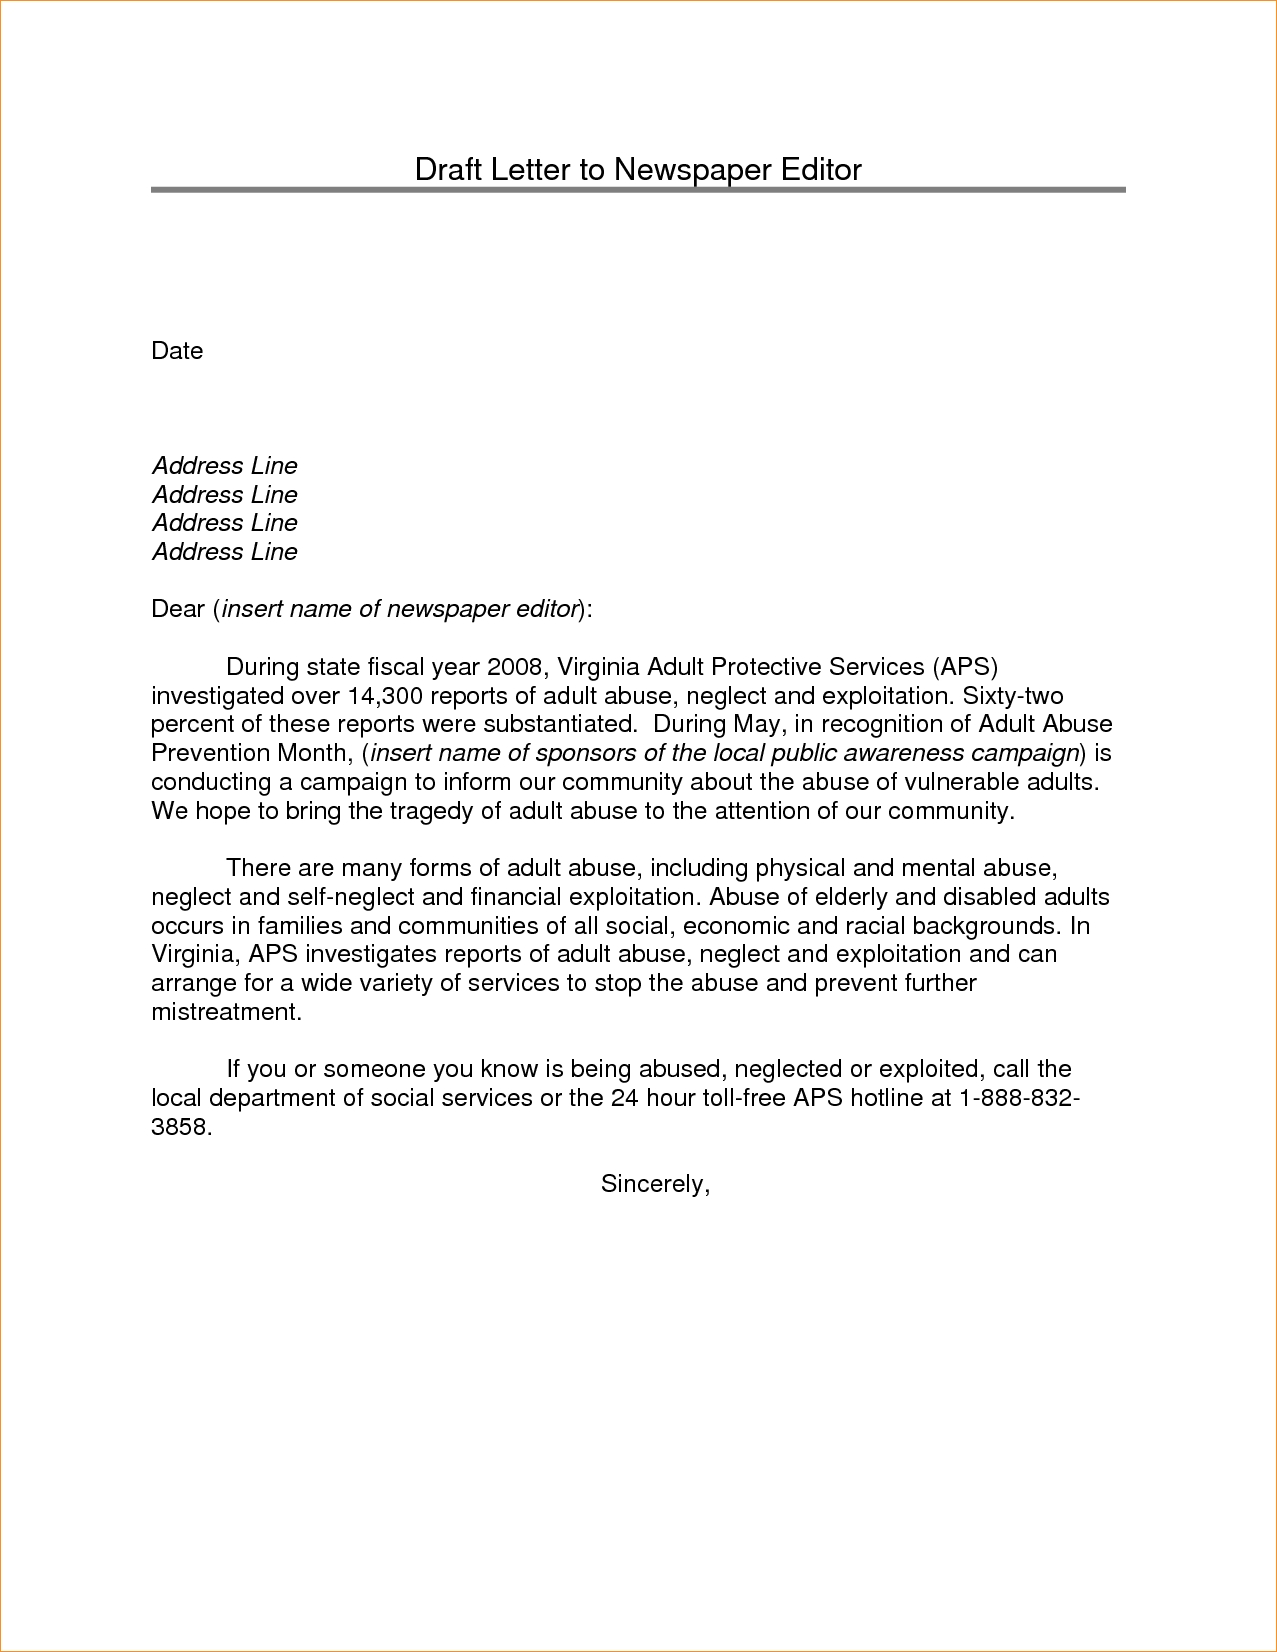 10 Elegant Letter To The Editor Ideas ideas of a formal letter to the editor sample business proposal 2023